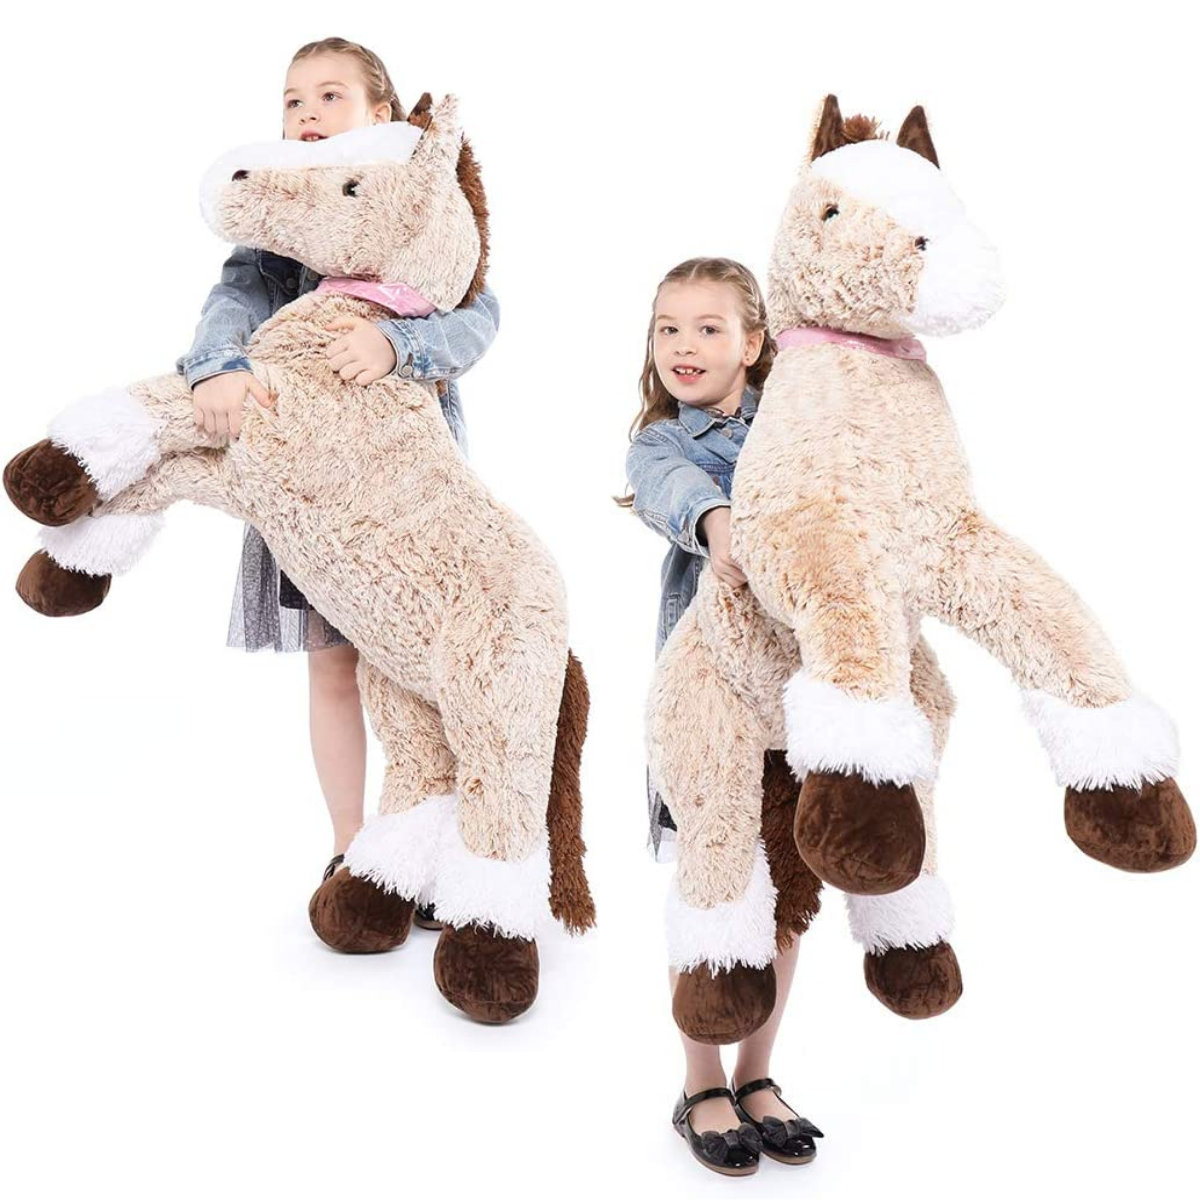 Giant Horse Stuffed Toy, Grey/Brown/Dark Brown, 35/47 Inches